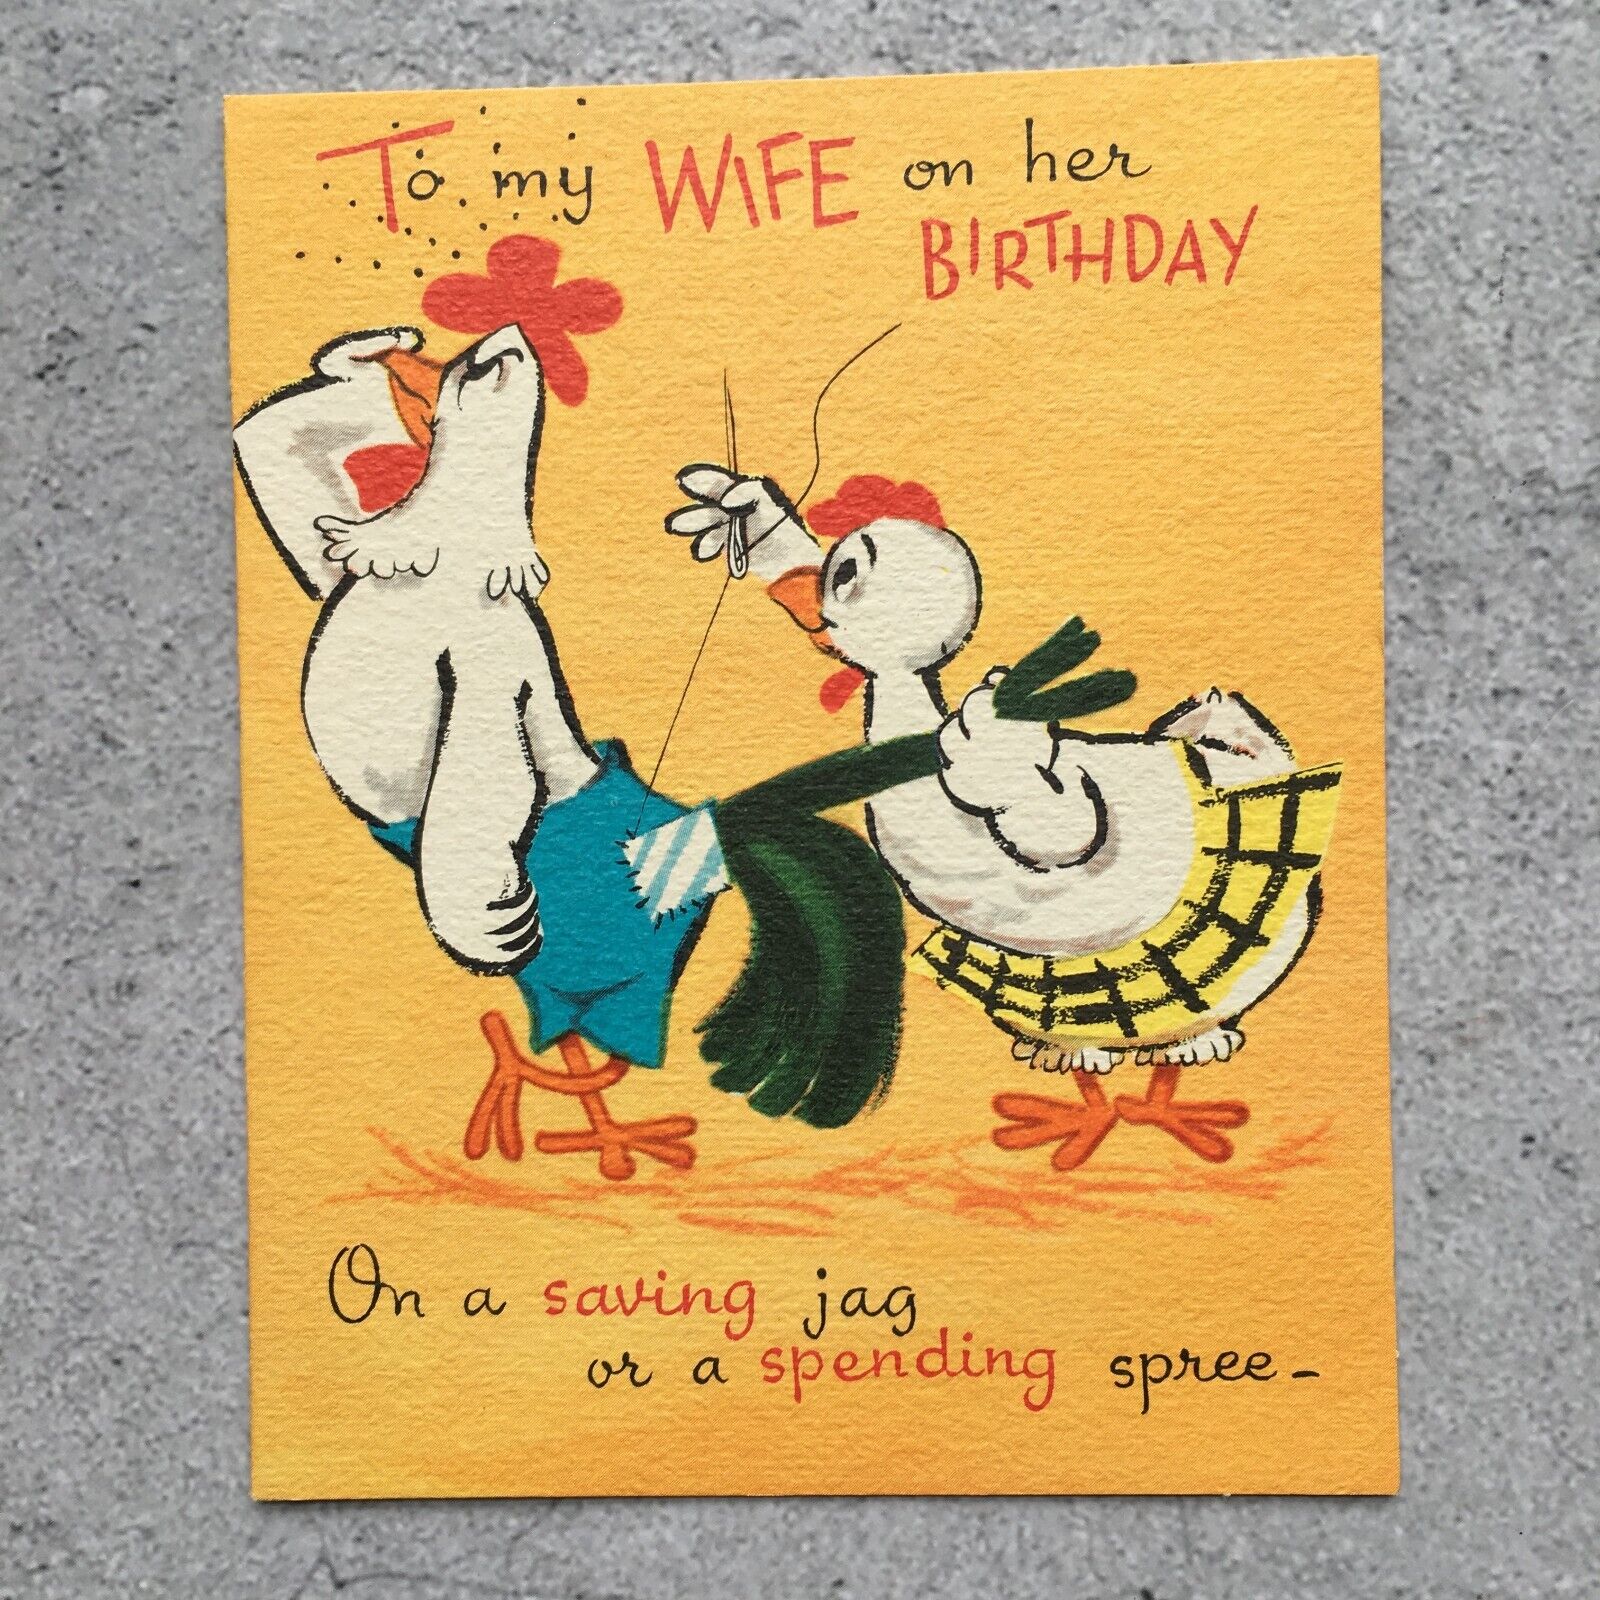 Retro Humorous Chicken Wife Birthday Card by Gibson Greeting Cards Used